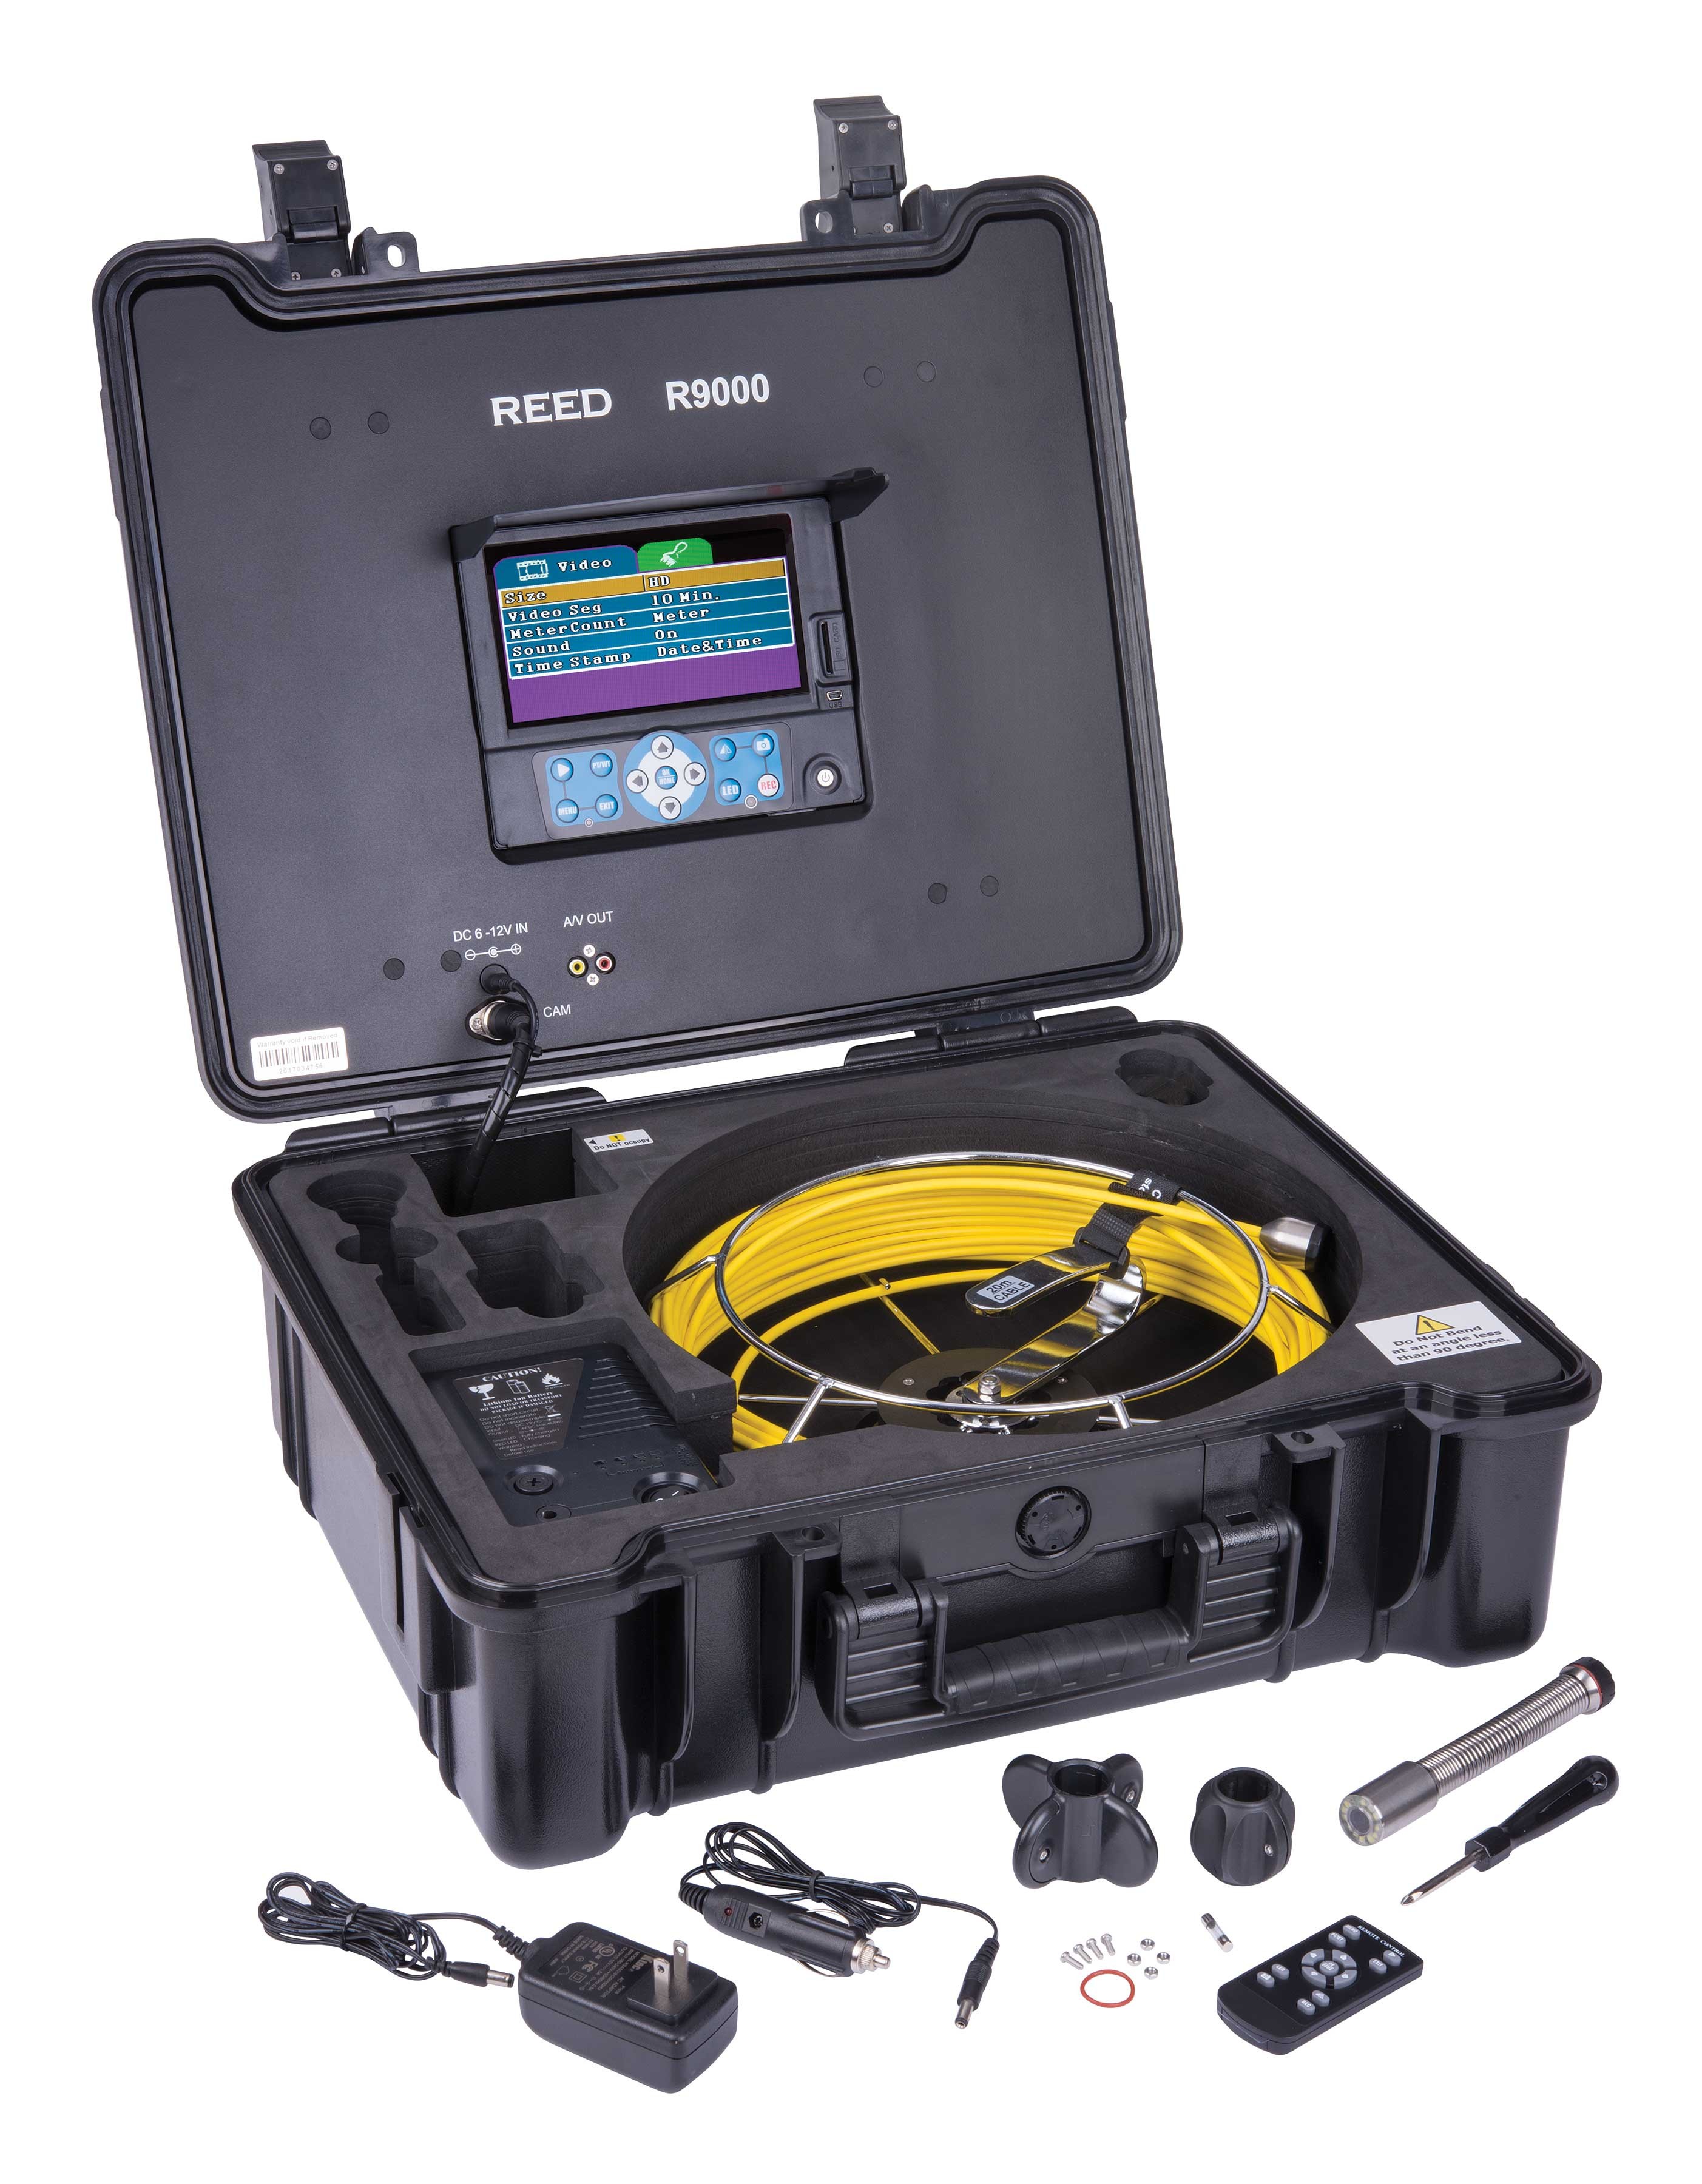 Reed R9000 High Definition Pipe Vidio Inspection System Included